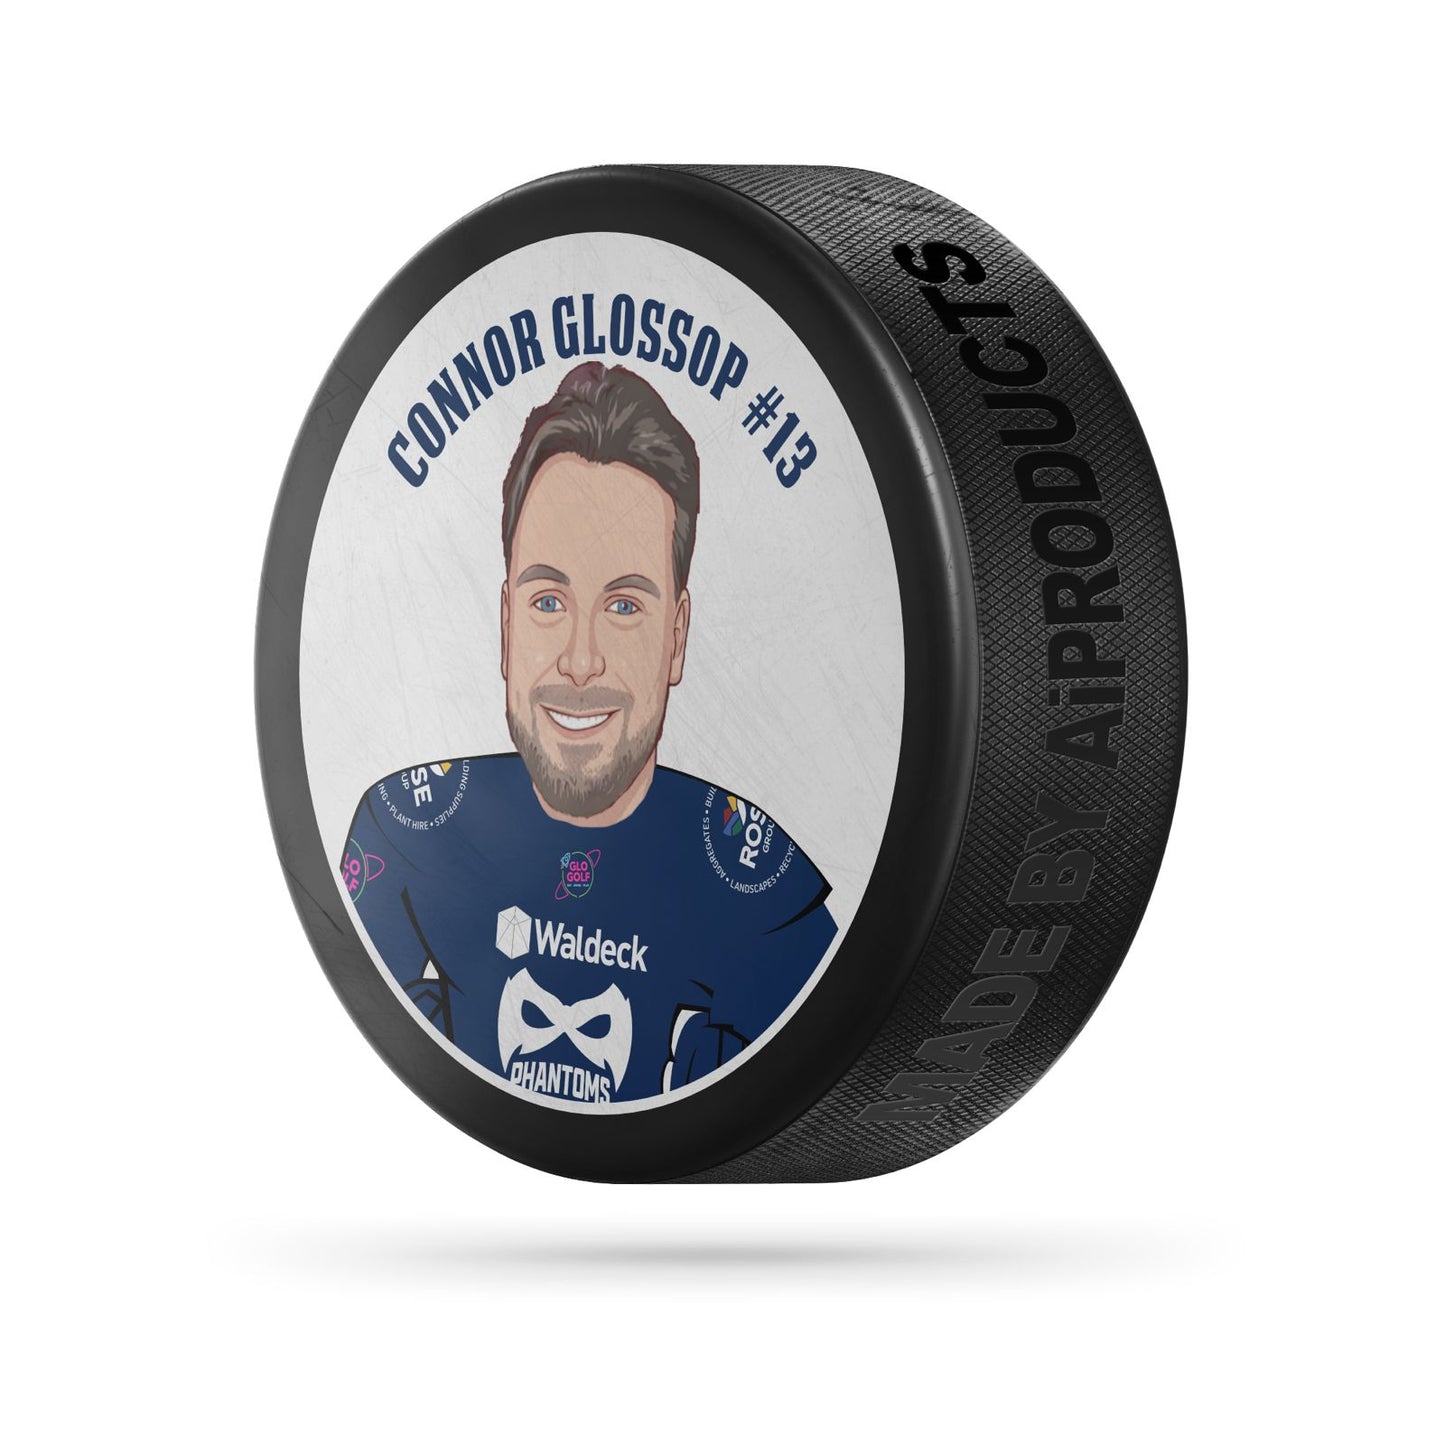 Connor Glossop Caricature Puck